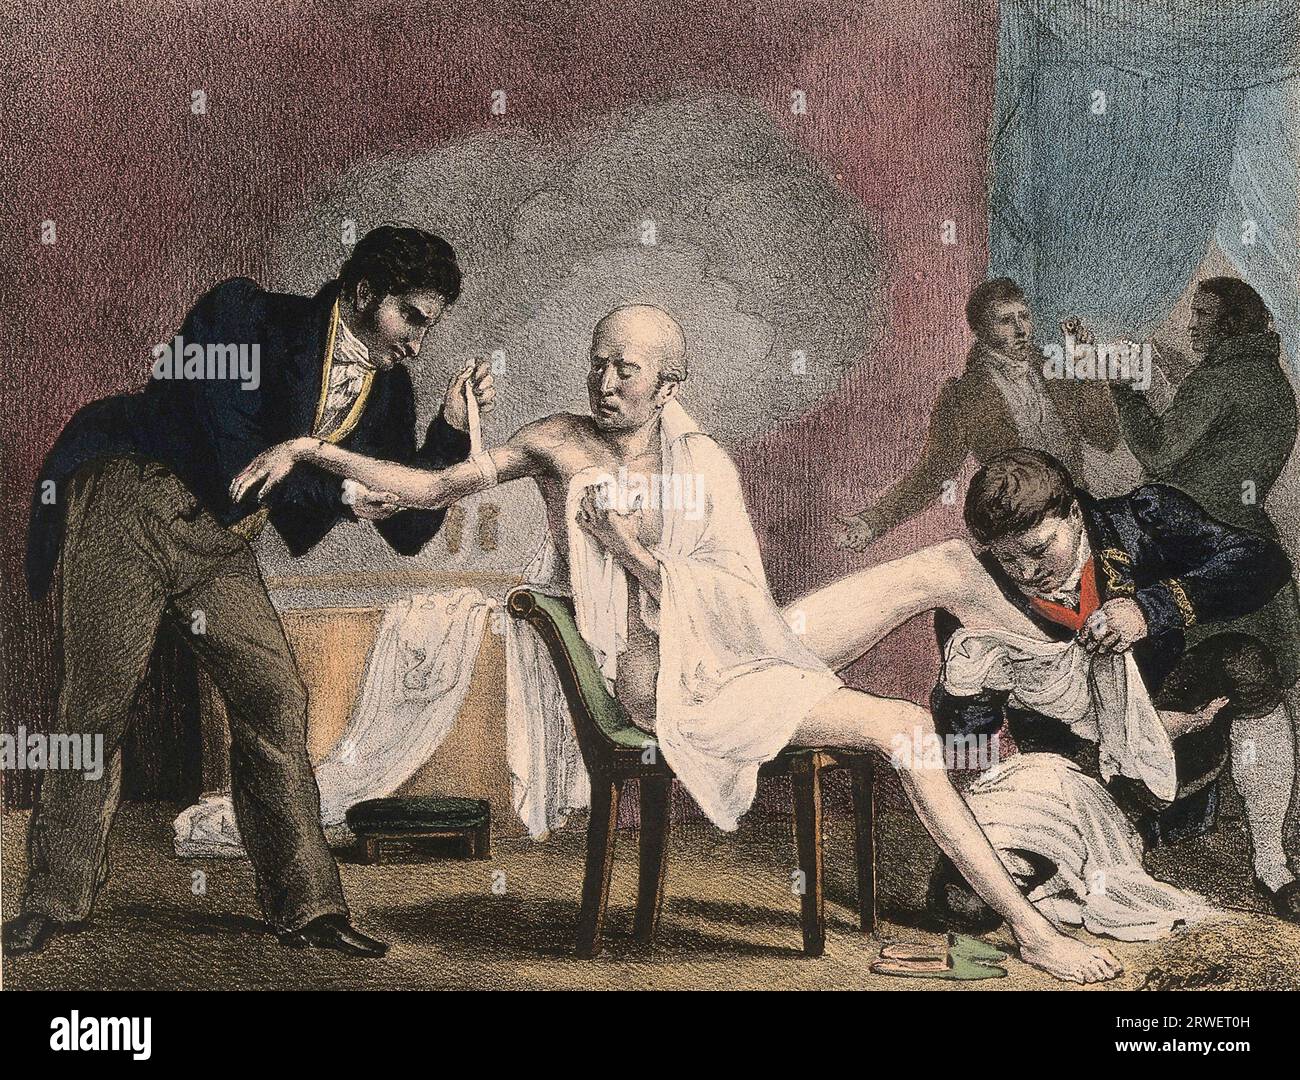 An emaciated old man being treated by four doctors, 1852, a steam bath billows in the background. The two men on the far right hold a glass eye and a pair of false teeth, France, Historic, digitally restored reproduction of an original of the time Stock Photo